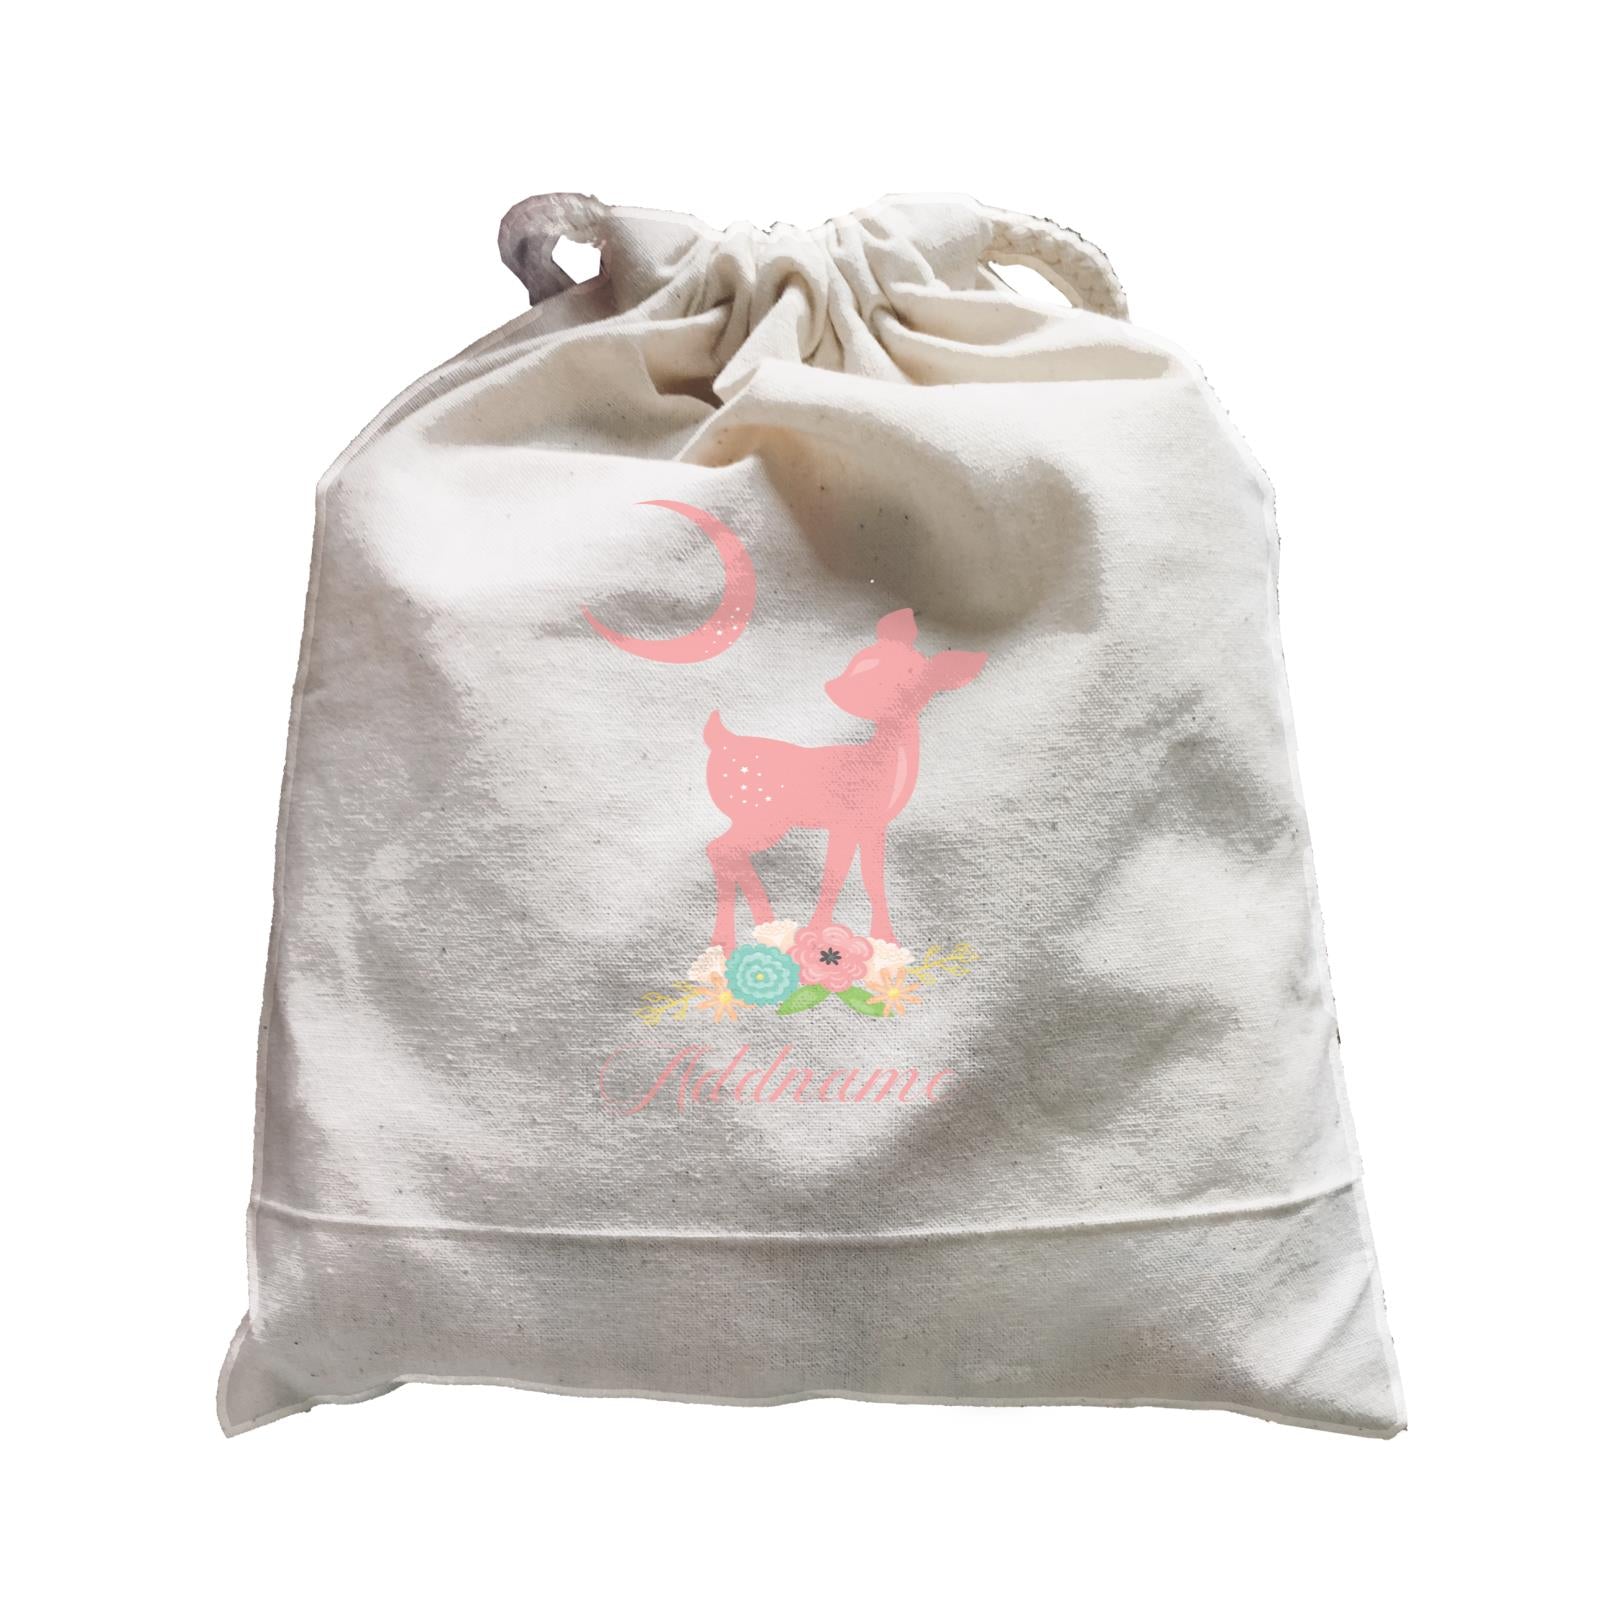 Basic Family Series Pastel Deer Pink Fawn With Flower Addname Satchel